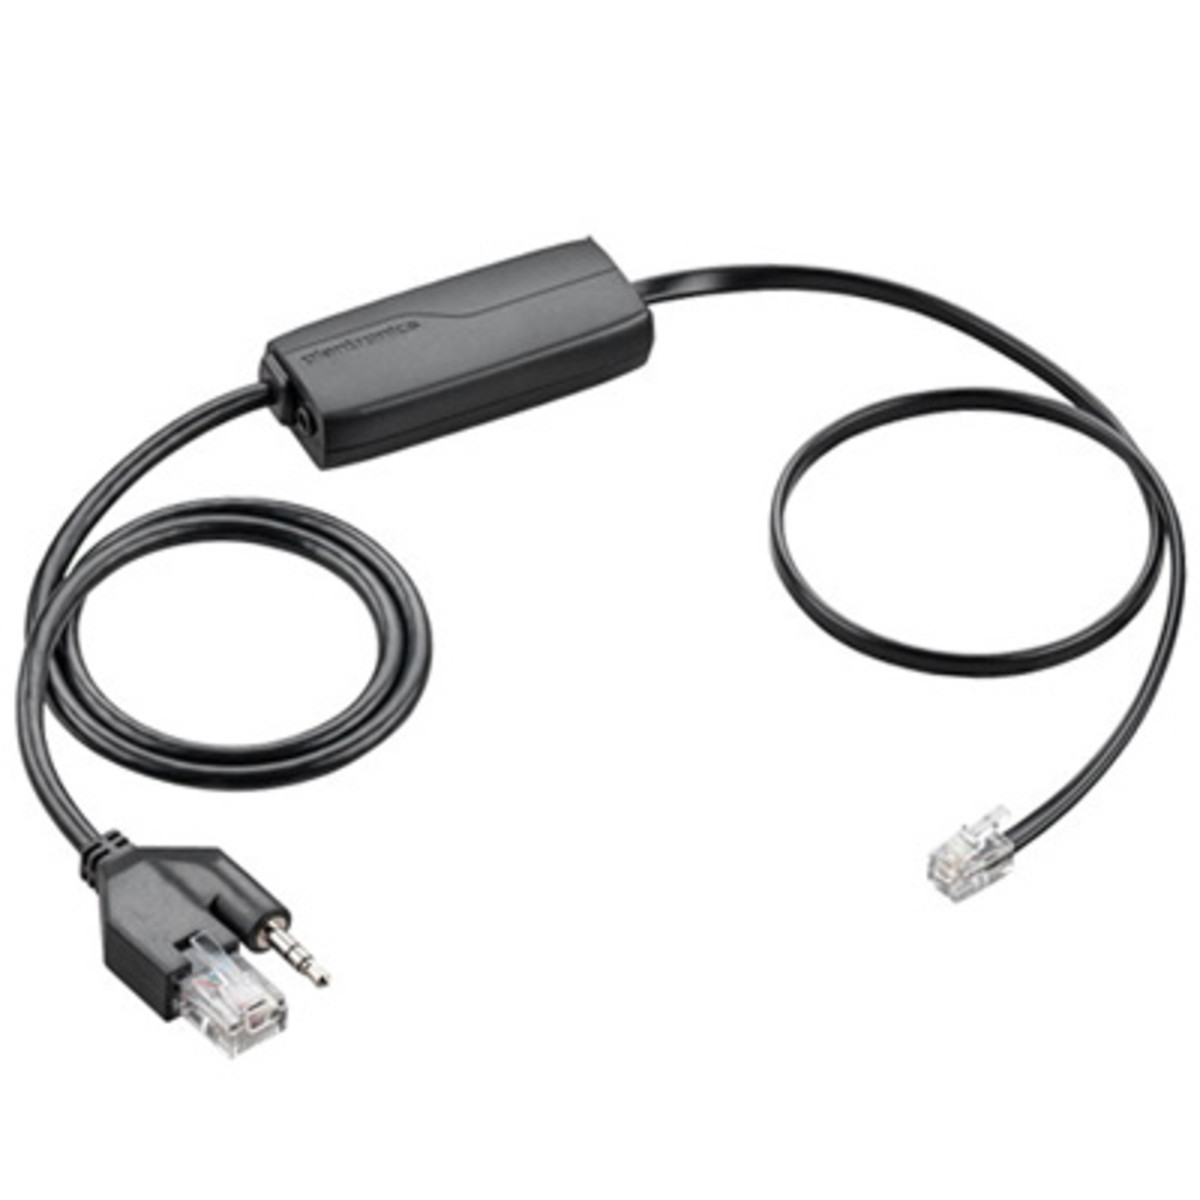 Plantronics APD-80 EHS Adapter Cable (p/n- 87327-01)